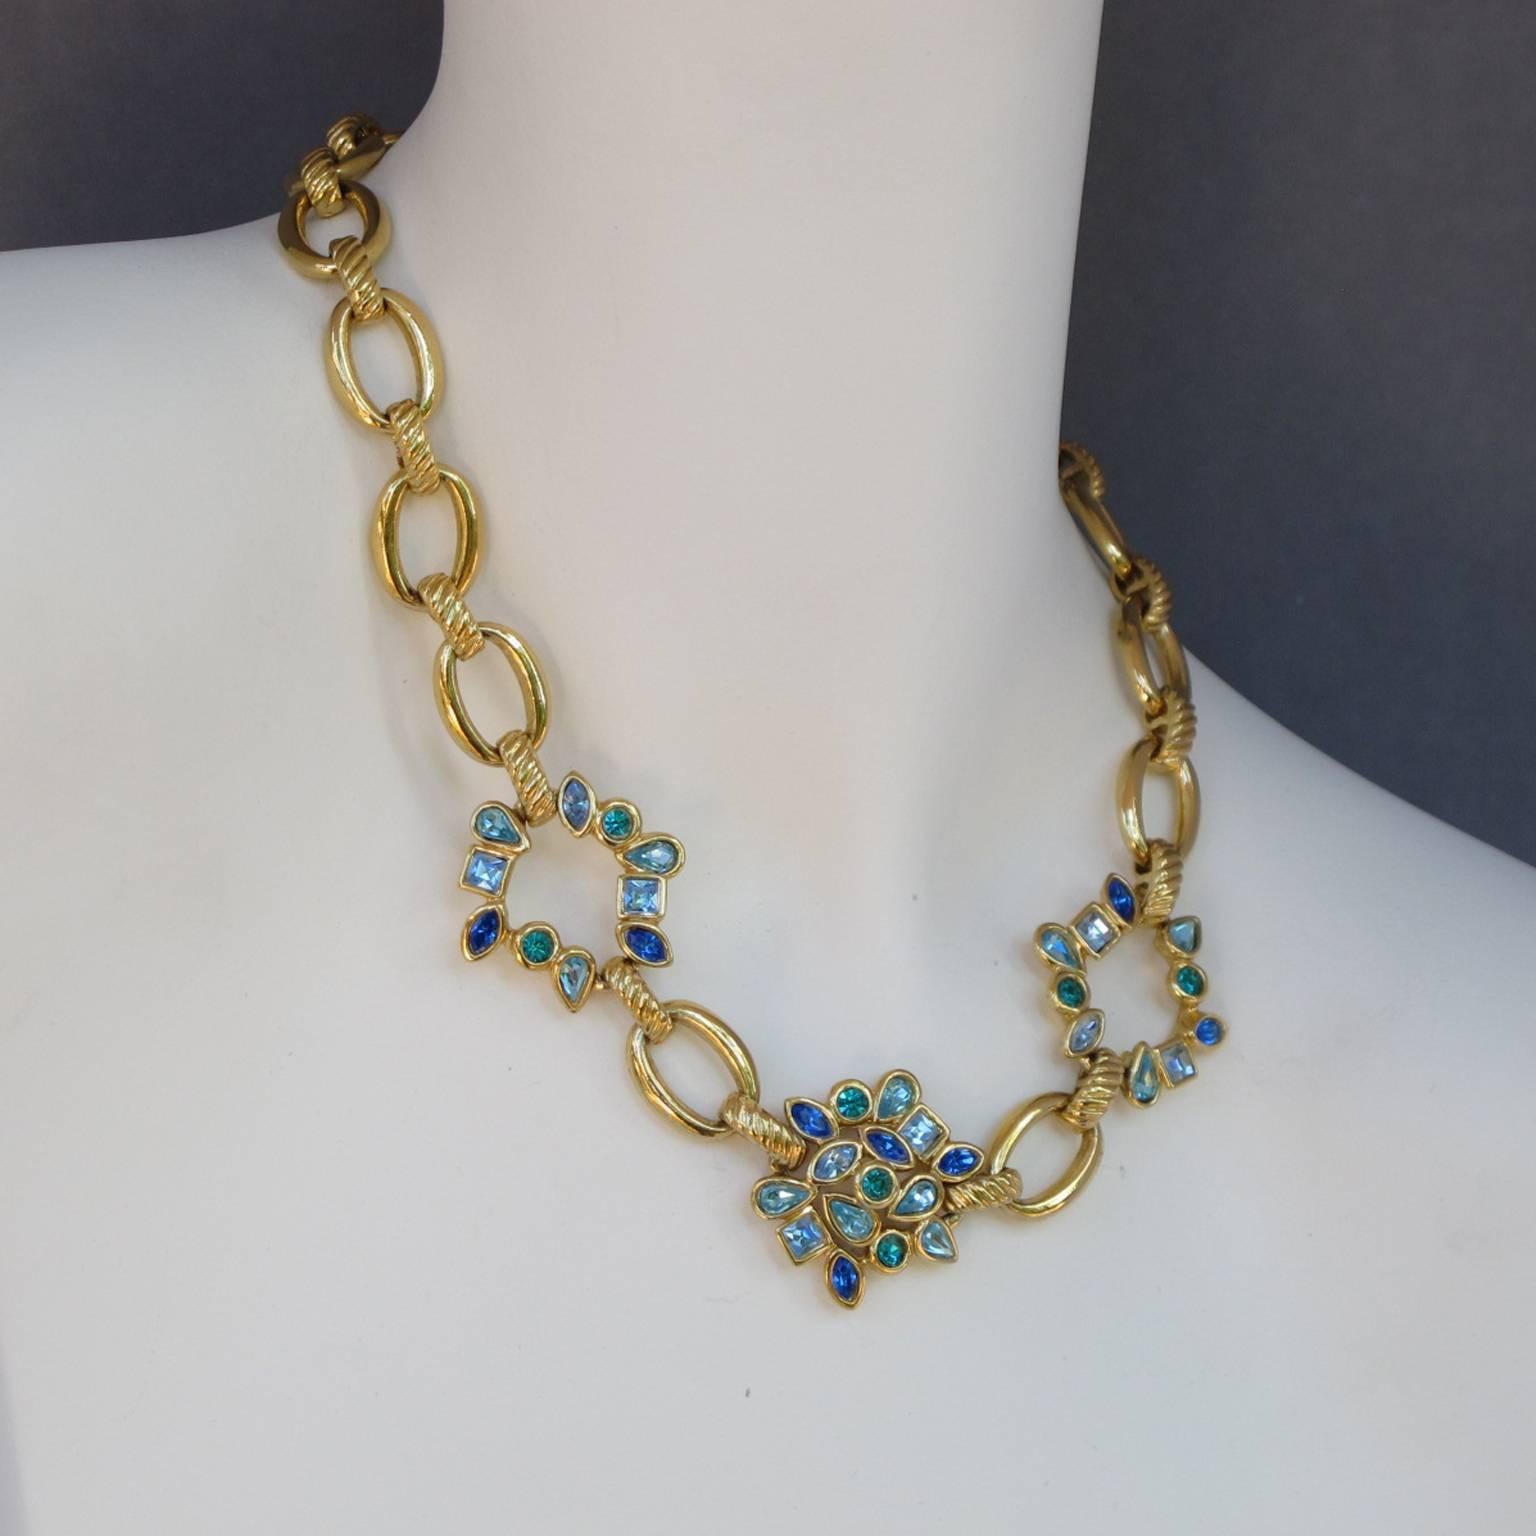 Vintage 1980s Yves Saint Laurent Paris gilt metal necklace with beautiful sparkling, blue-green colored glass rhinestones. Elegant gilt metal chain with metal all pierced and textured ornate with three central floral elements topped with rhinestones